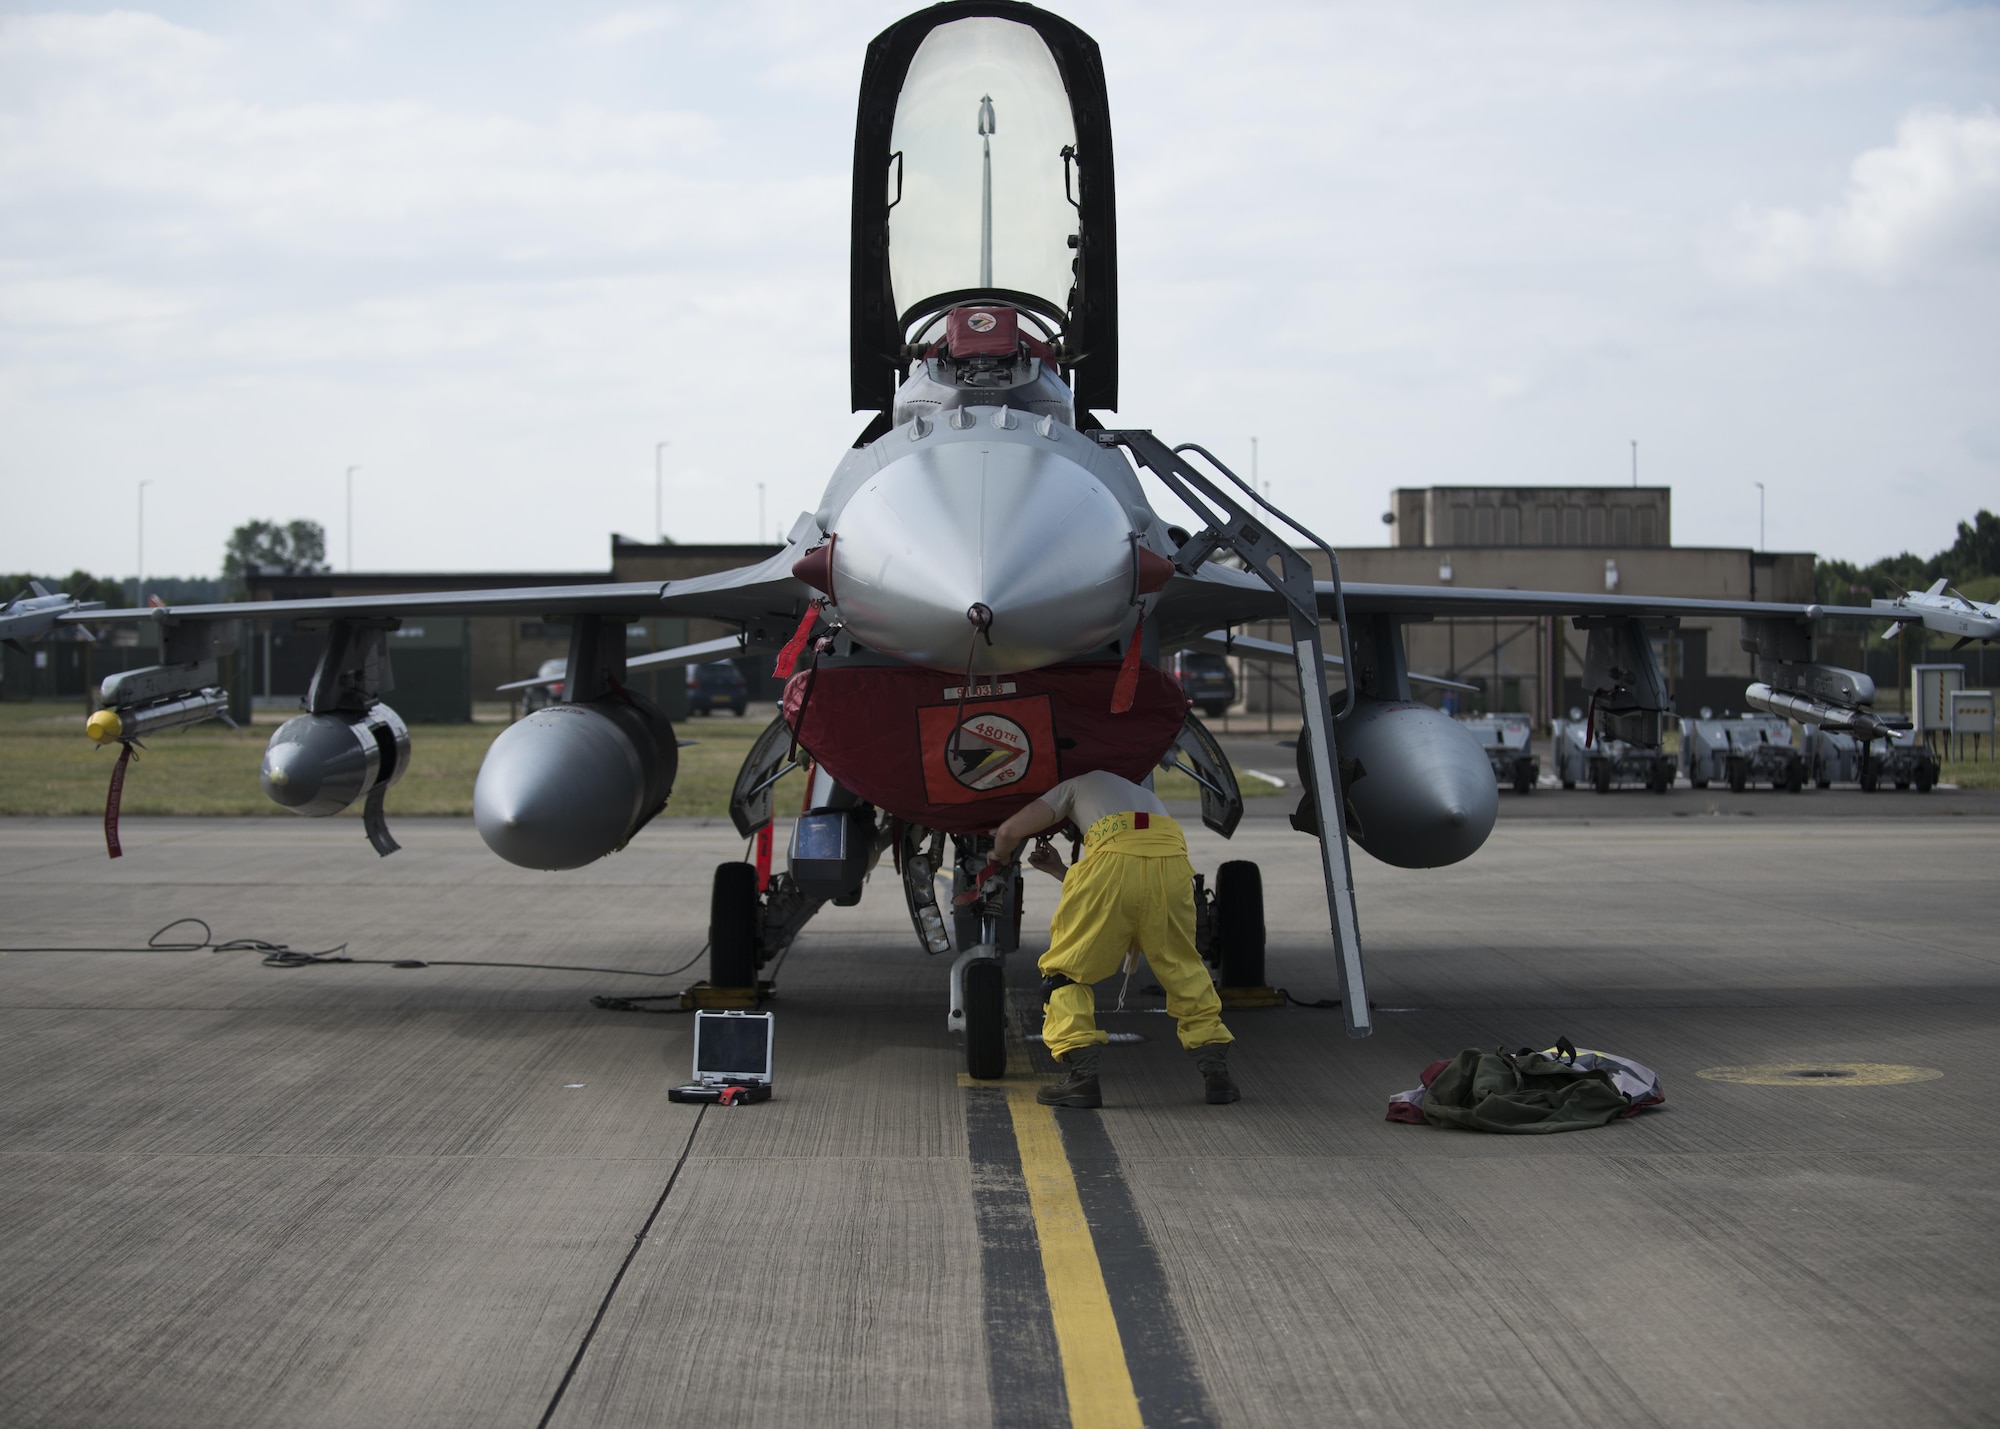 An Airman from the 52nd Fighter Wing at Spangdahlem Air Base, Germany, works on a parked F-16 Fighting Falcon assigned to the 52nd FW, at Royal Air Force Lakenheath, England, July 10. Airmen from the 52nd FW will train alongside 48th Fighter Wing Airmen and British Allies during a flying training deployment here, which is scheduled to last several weeks. (U.S. Air Force photo/Senior Airman Malcolm Mayfield)